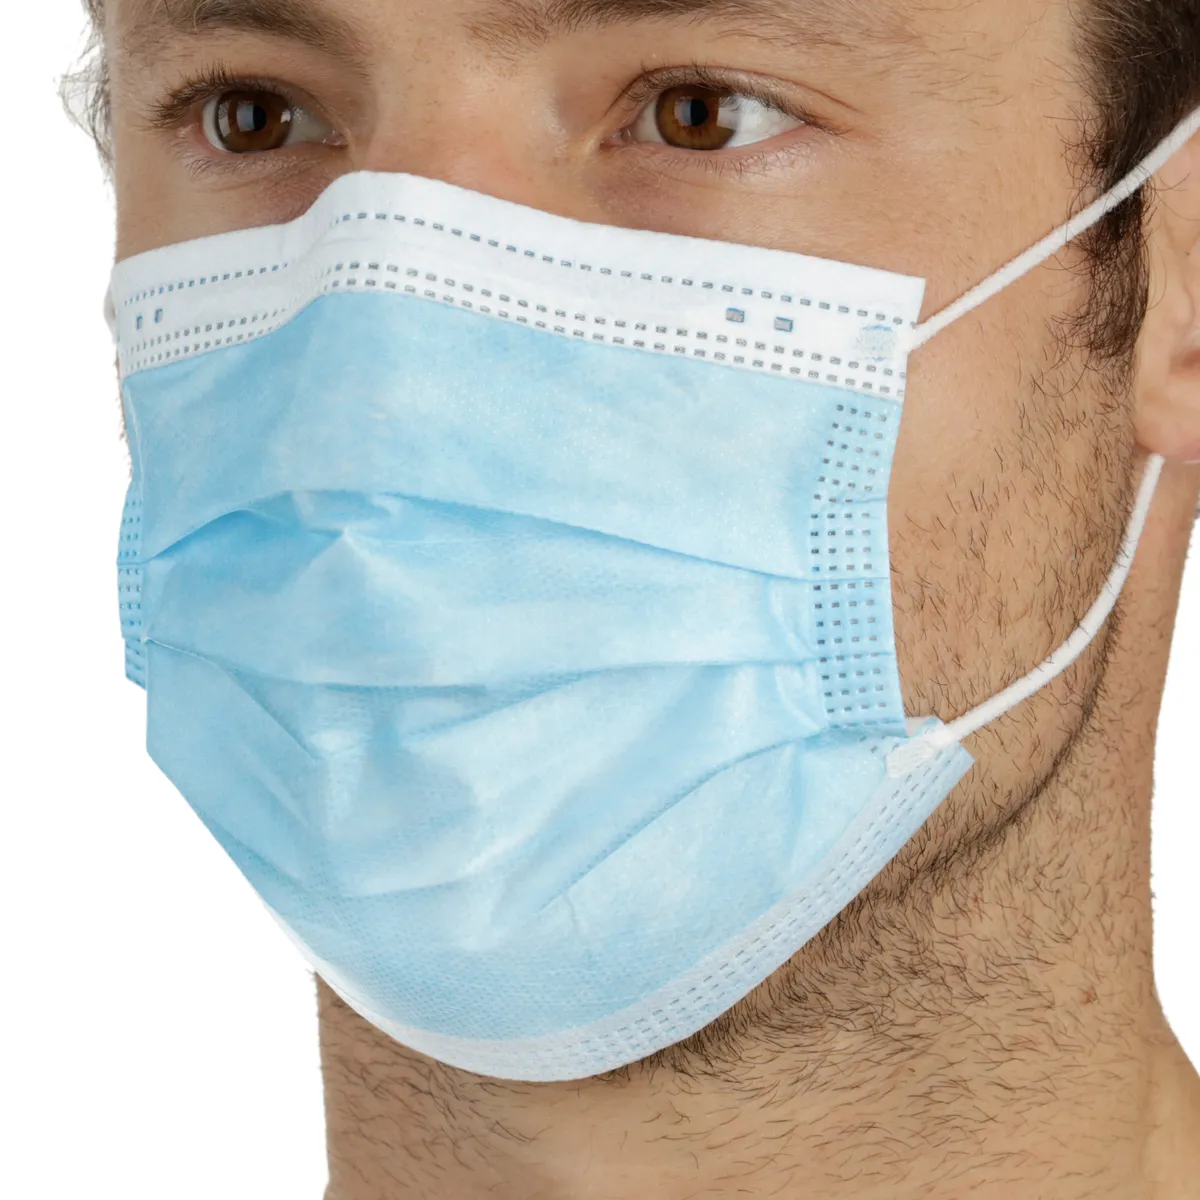 Disposable Surgical Mask Level 3 PPE Blue Male Wearing